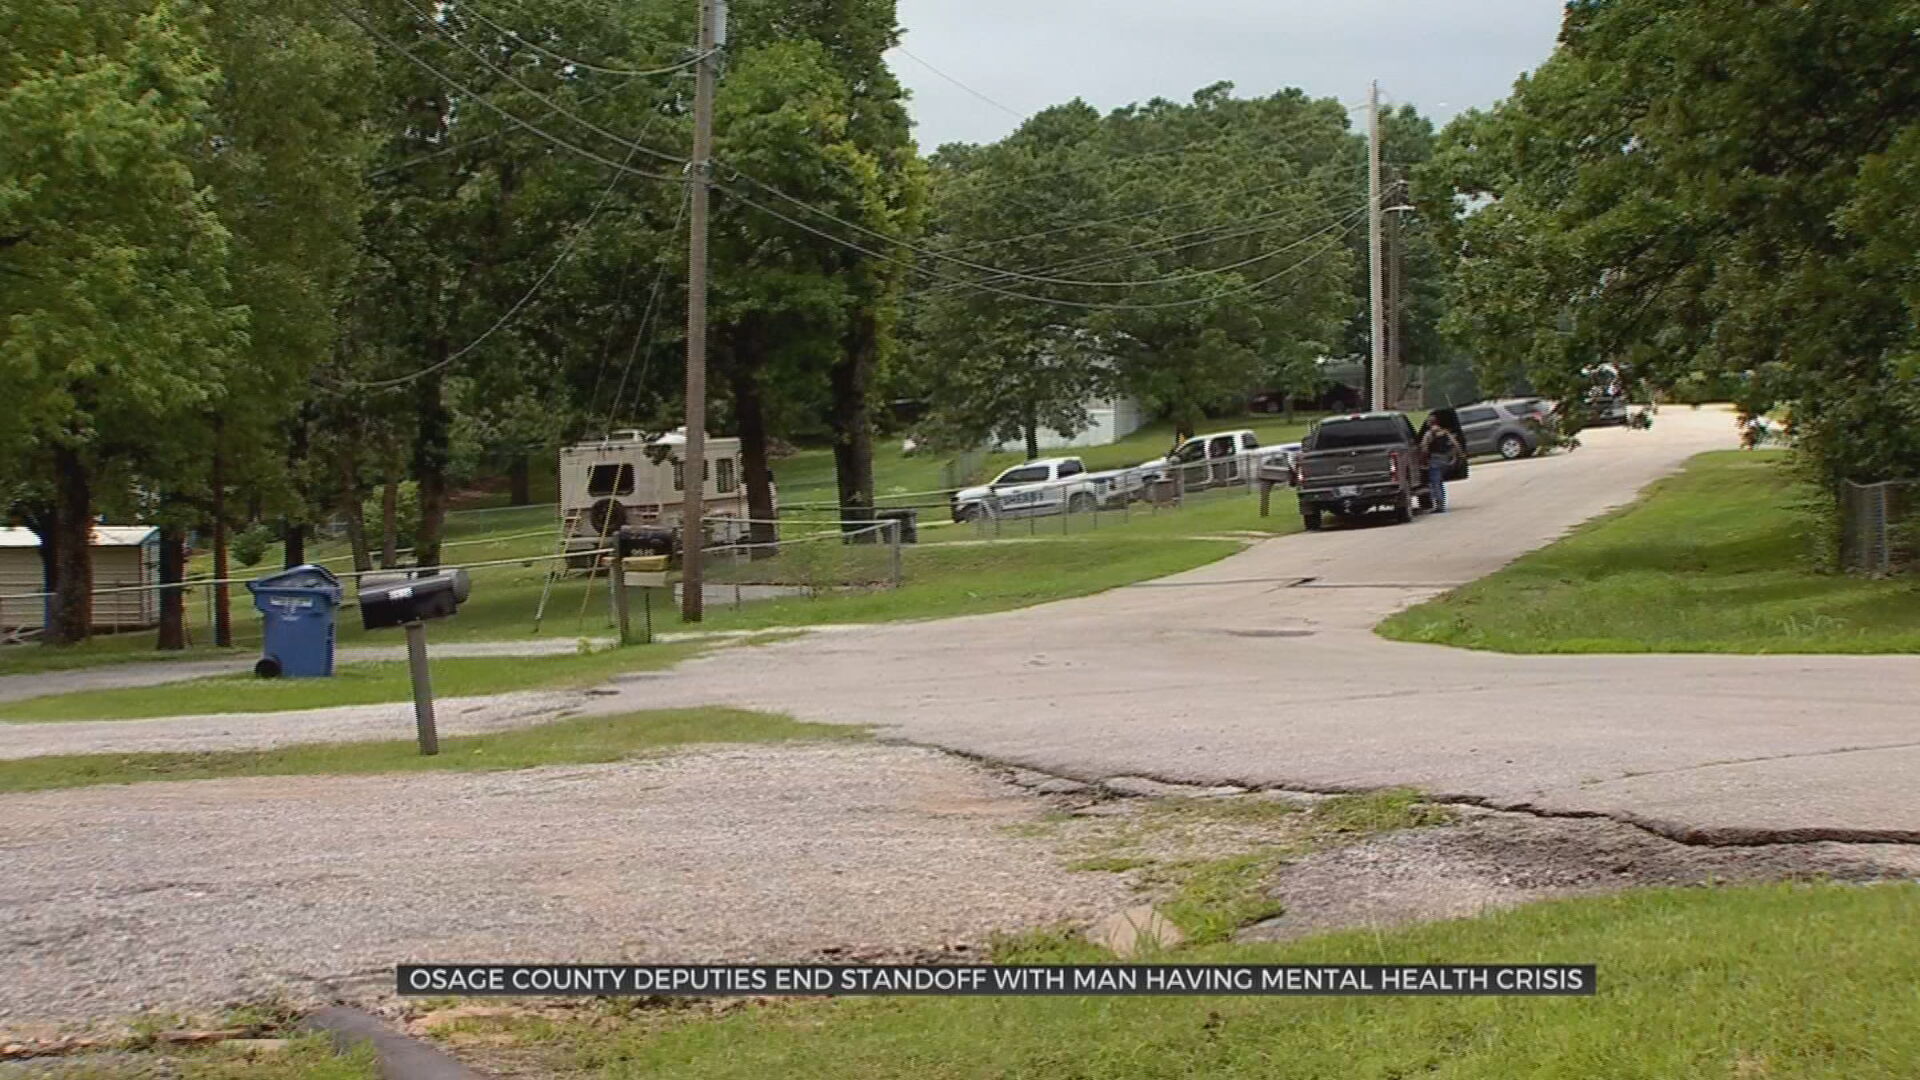 Osage County Standoff Ends; Sheriff Says Situation Was A Mental Health Crisis